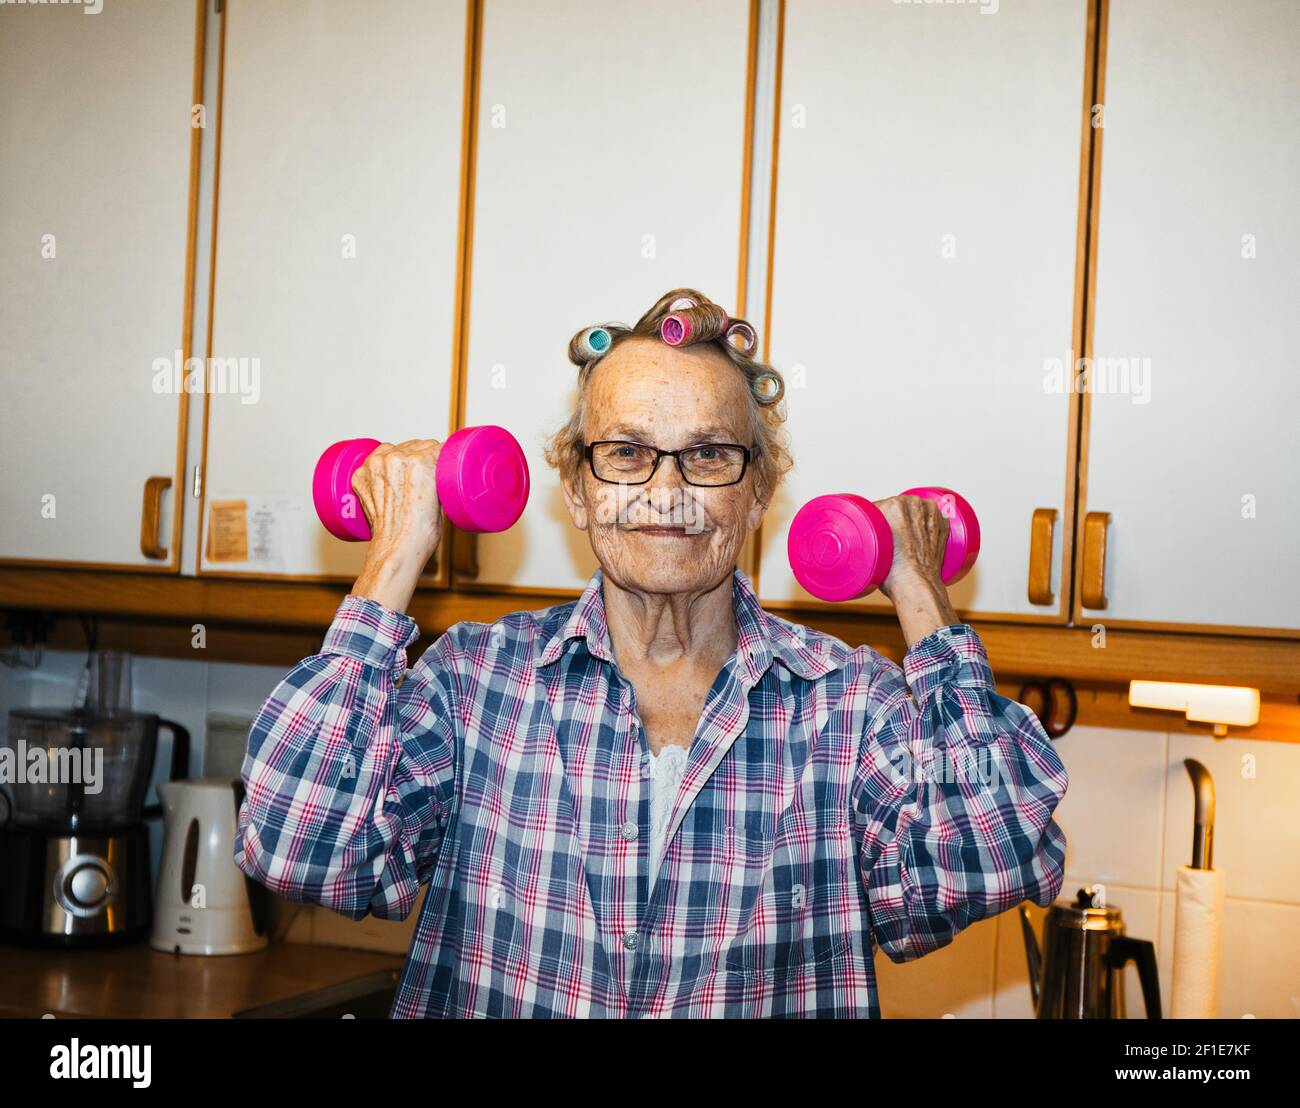 Smiling happy cheerful elderly senior Swedish woman lifting pink dumbbells in kitchen. Concept of active lifestyle, fitness, health Stock Photo